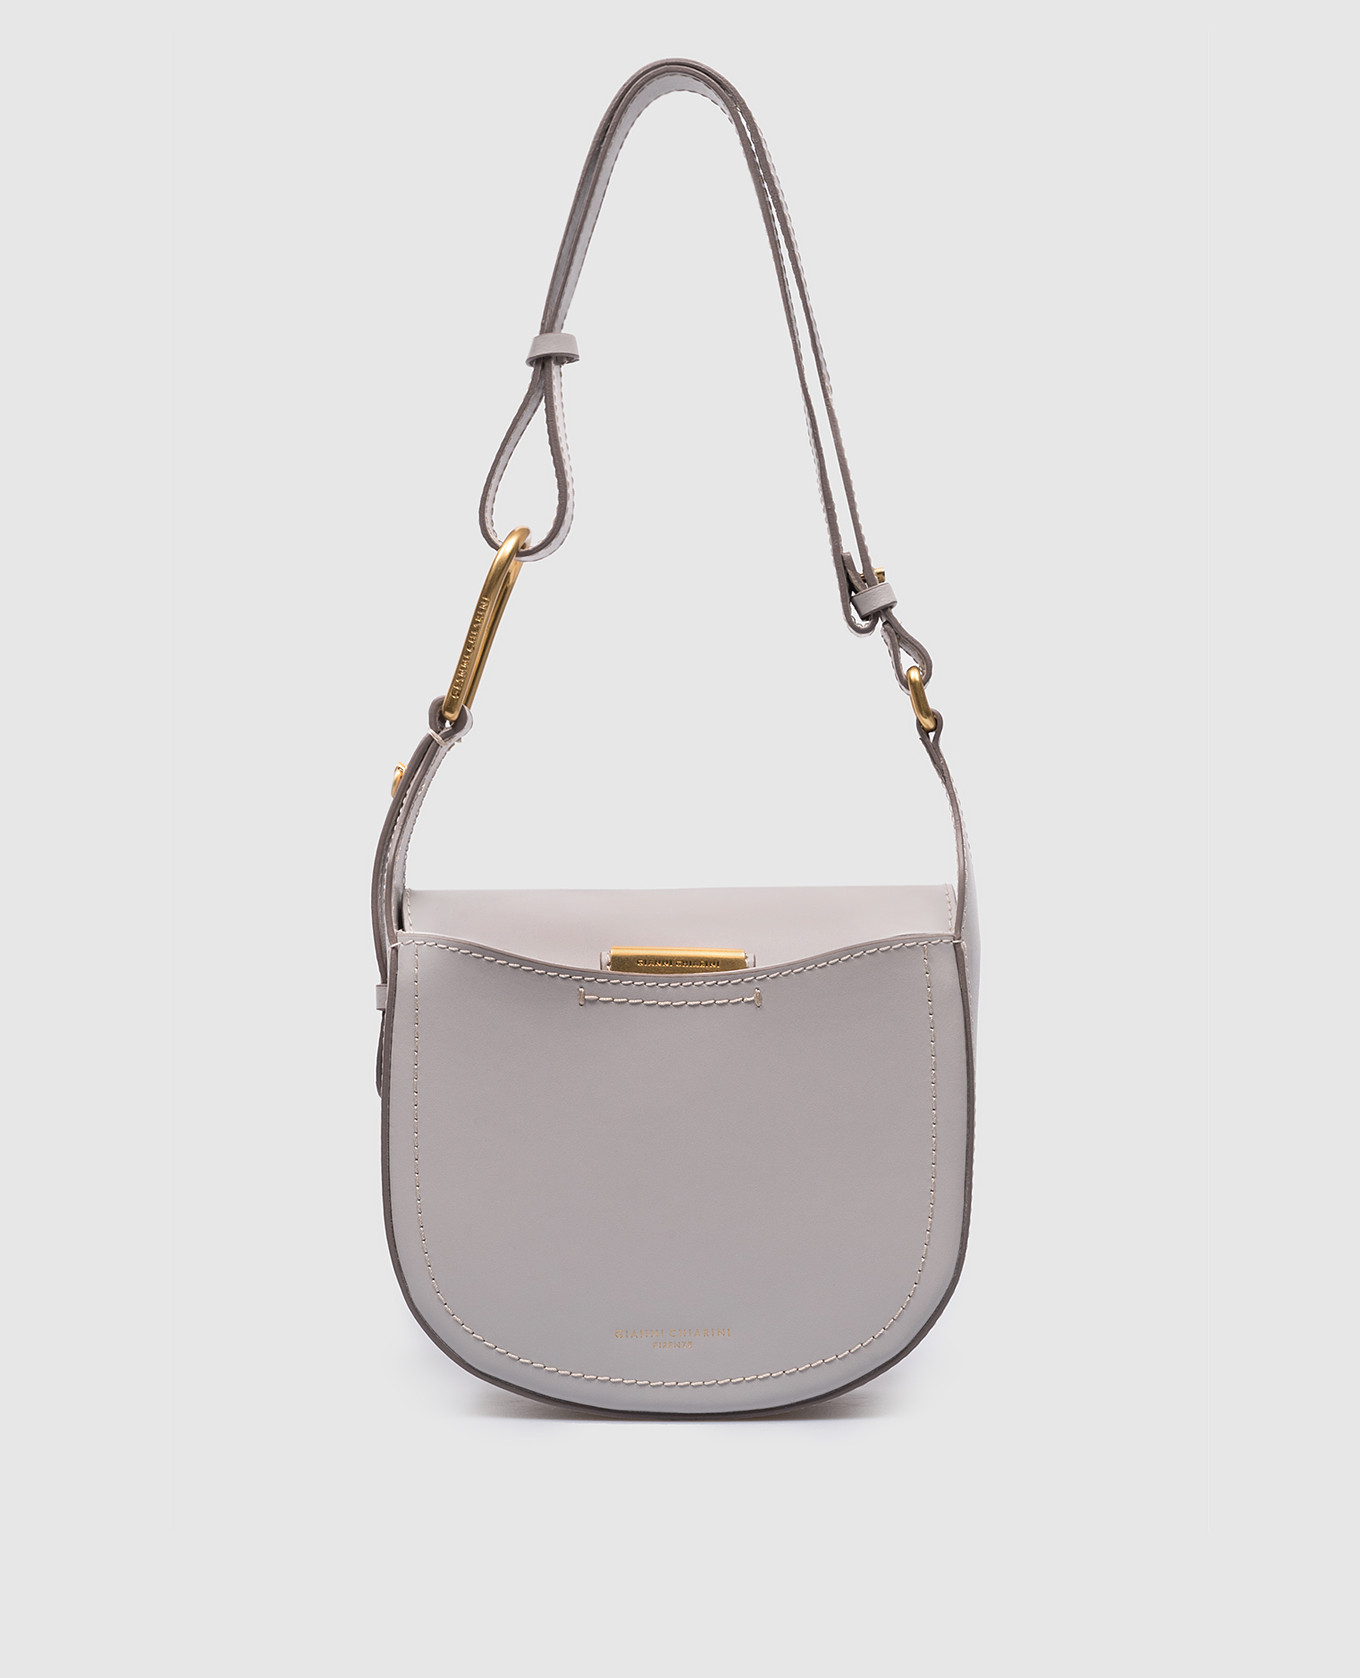 Sandy saddle bag in gray leather with logo print